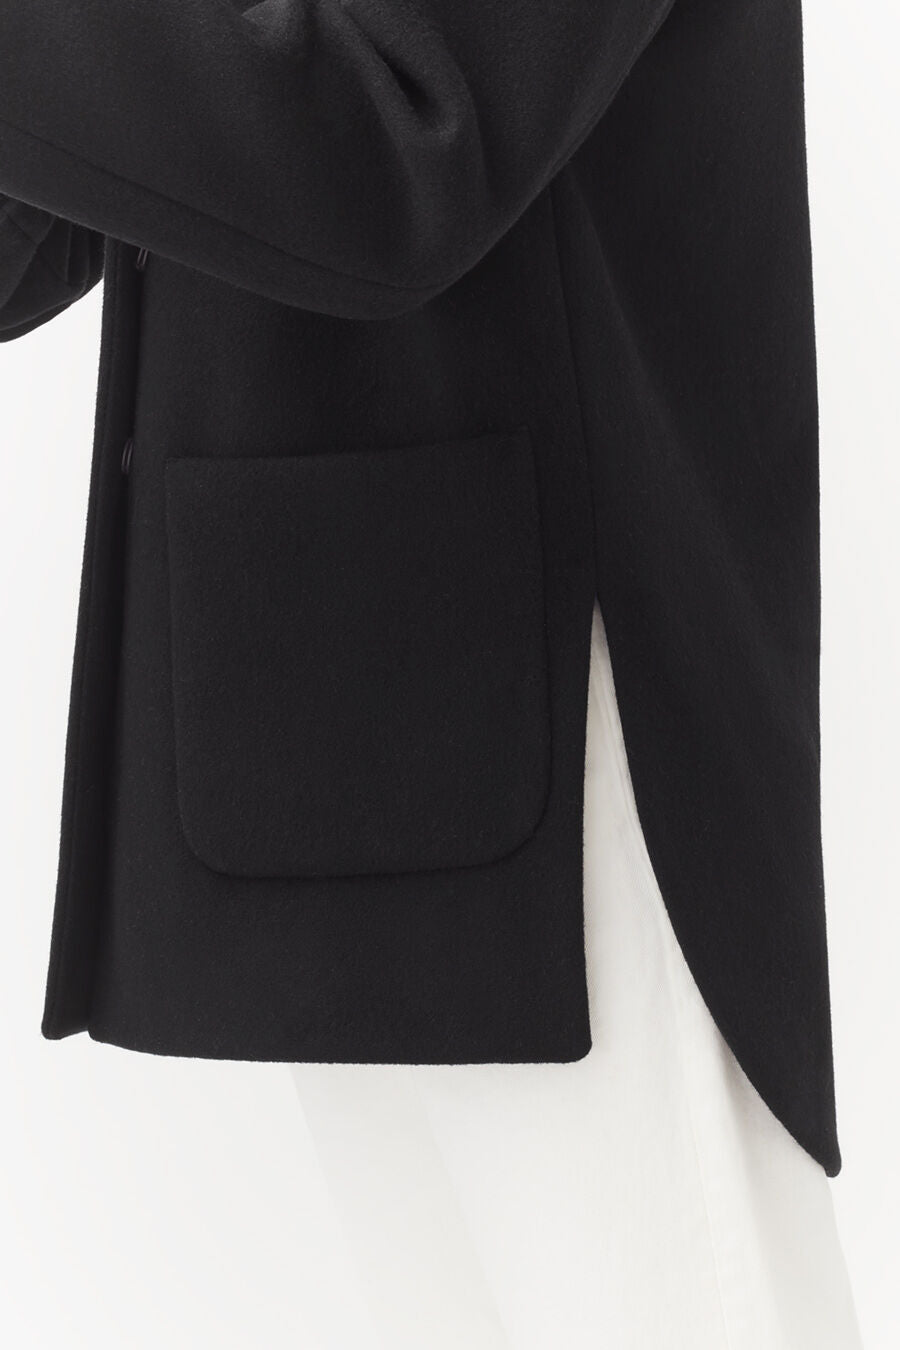 Close-up of a jacket with a pocket and draped fabric.